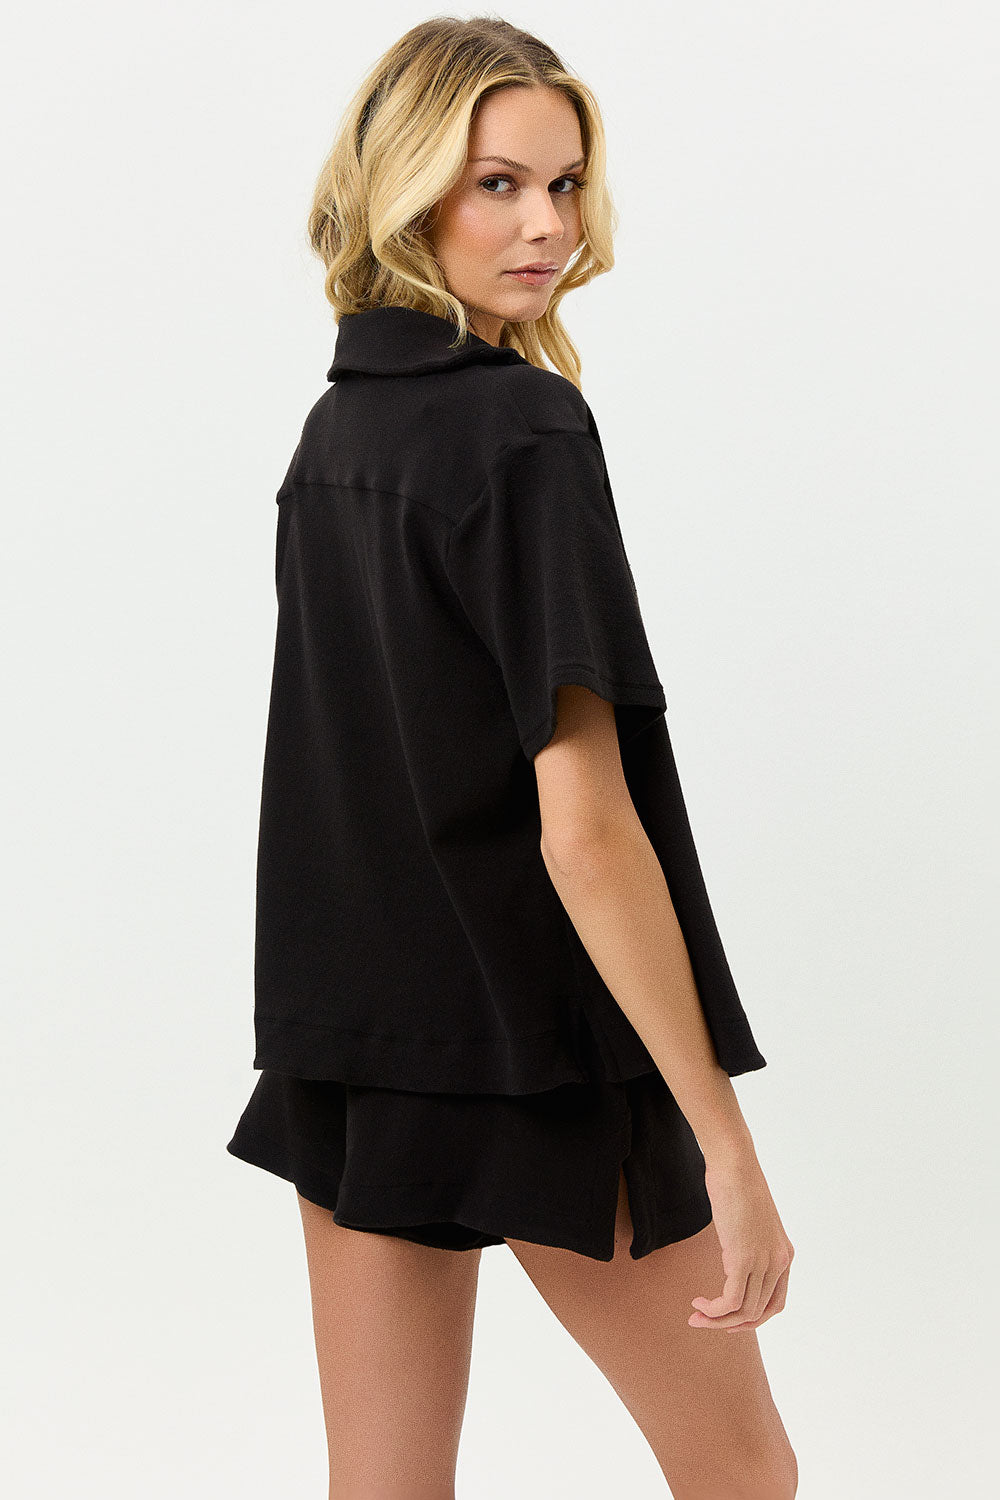 Coco Terry Button Up Shirt - Black